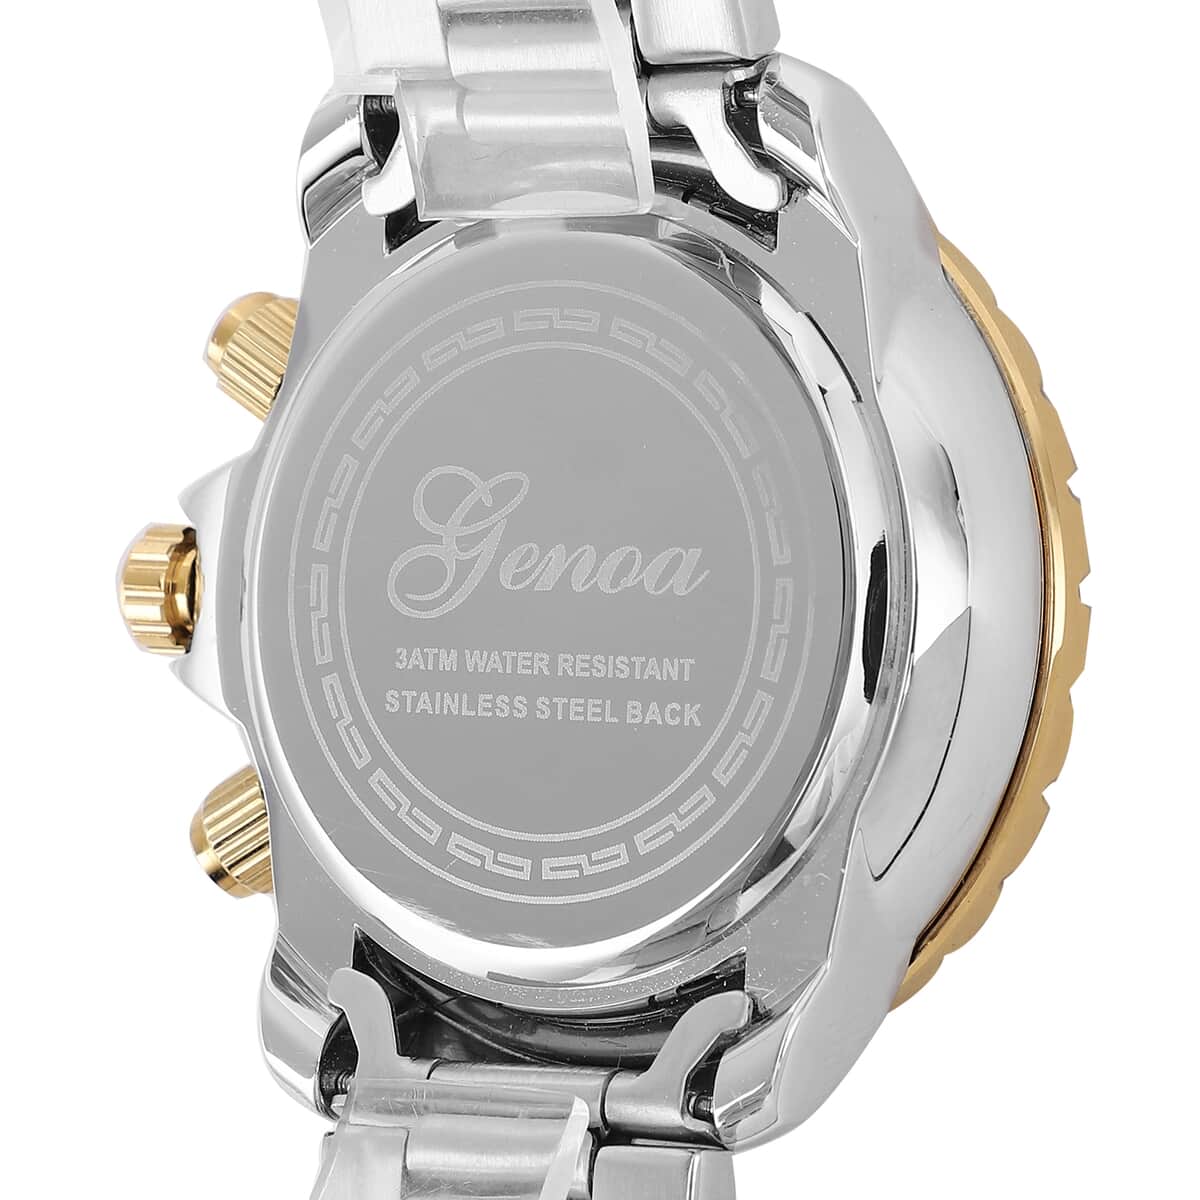 Genoa Multi-Functional Quartz Movement Watch with Blue Dial & Stainless Steel Strap (46 mm) image number 5